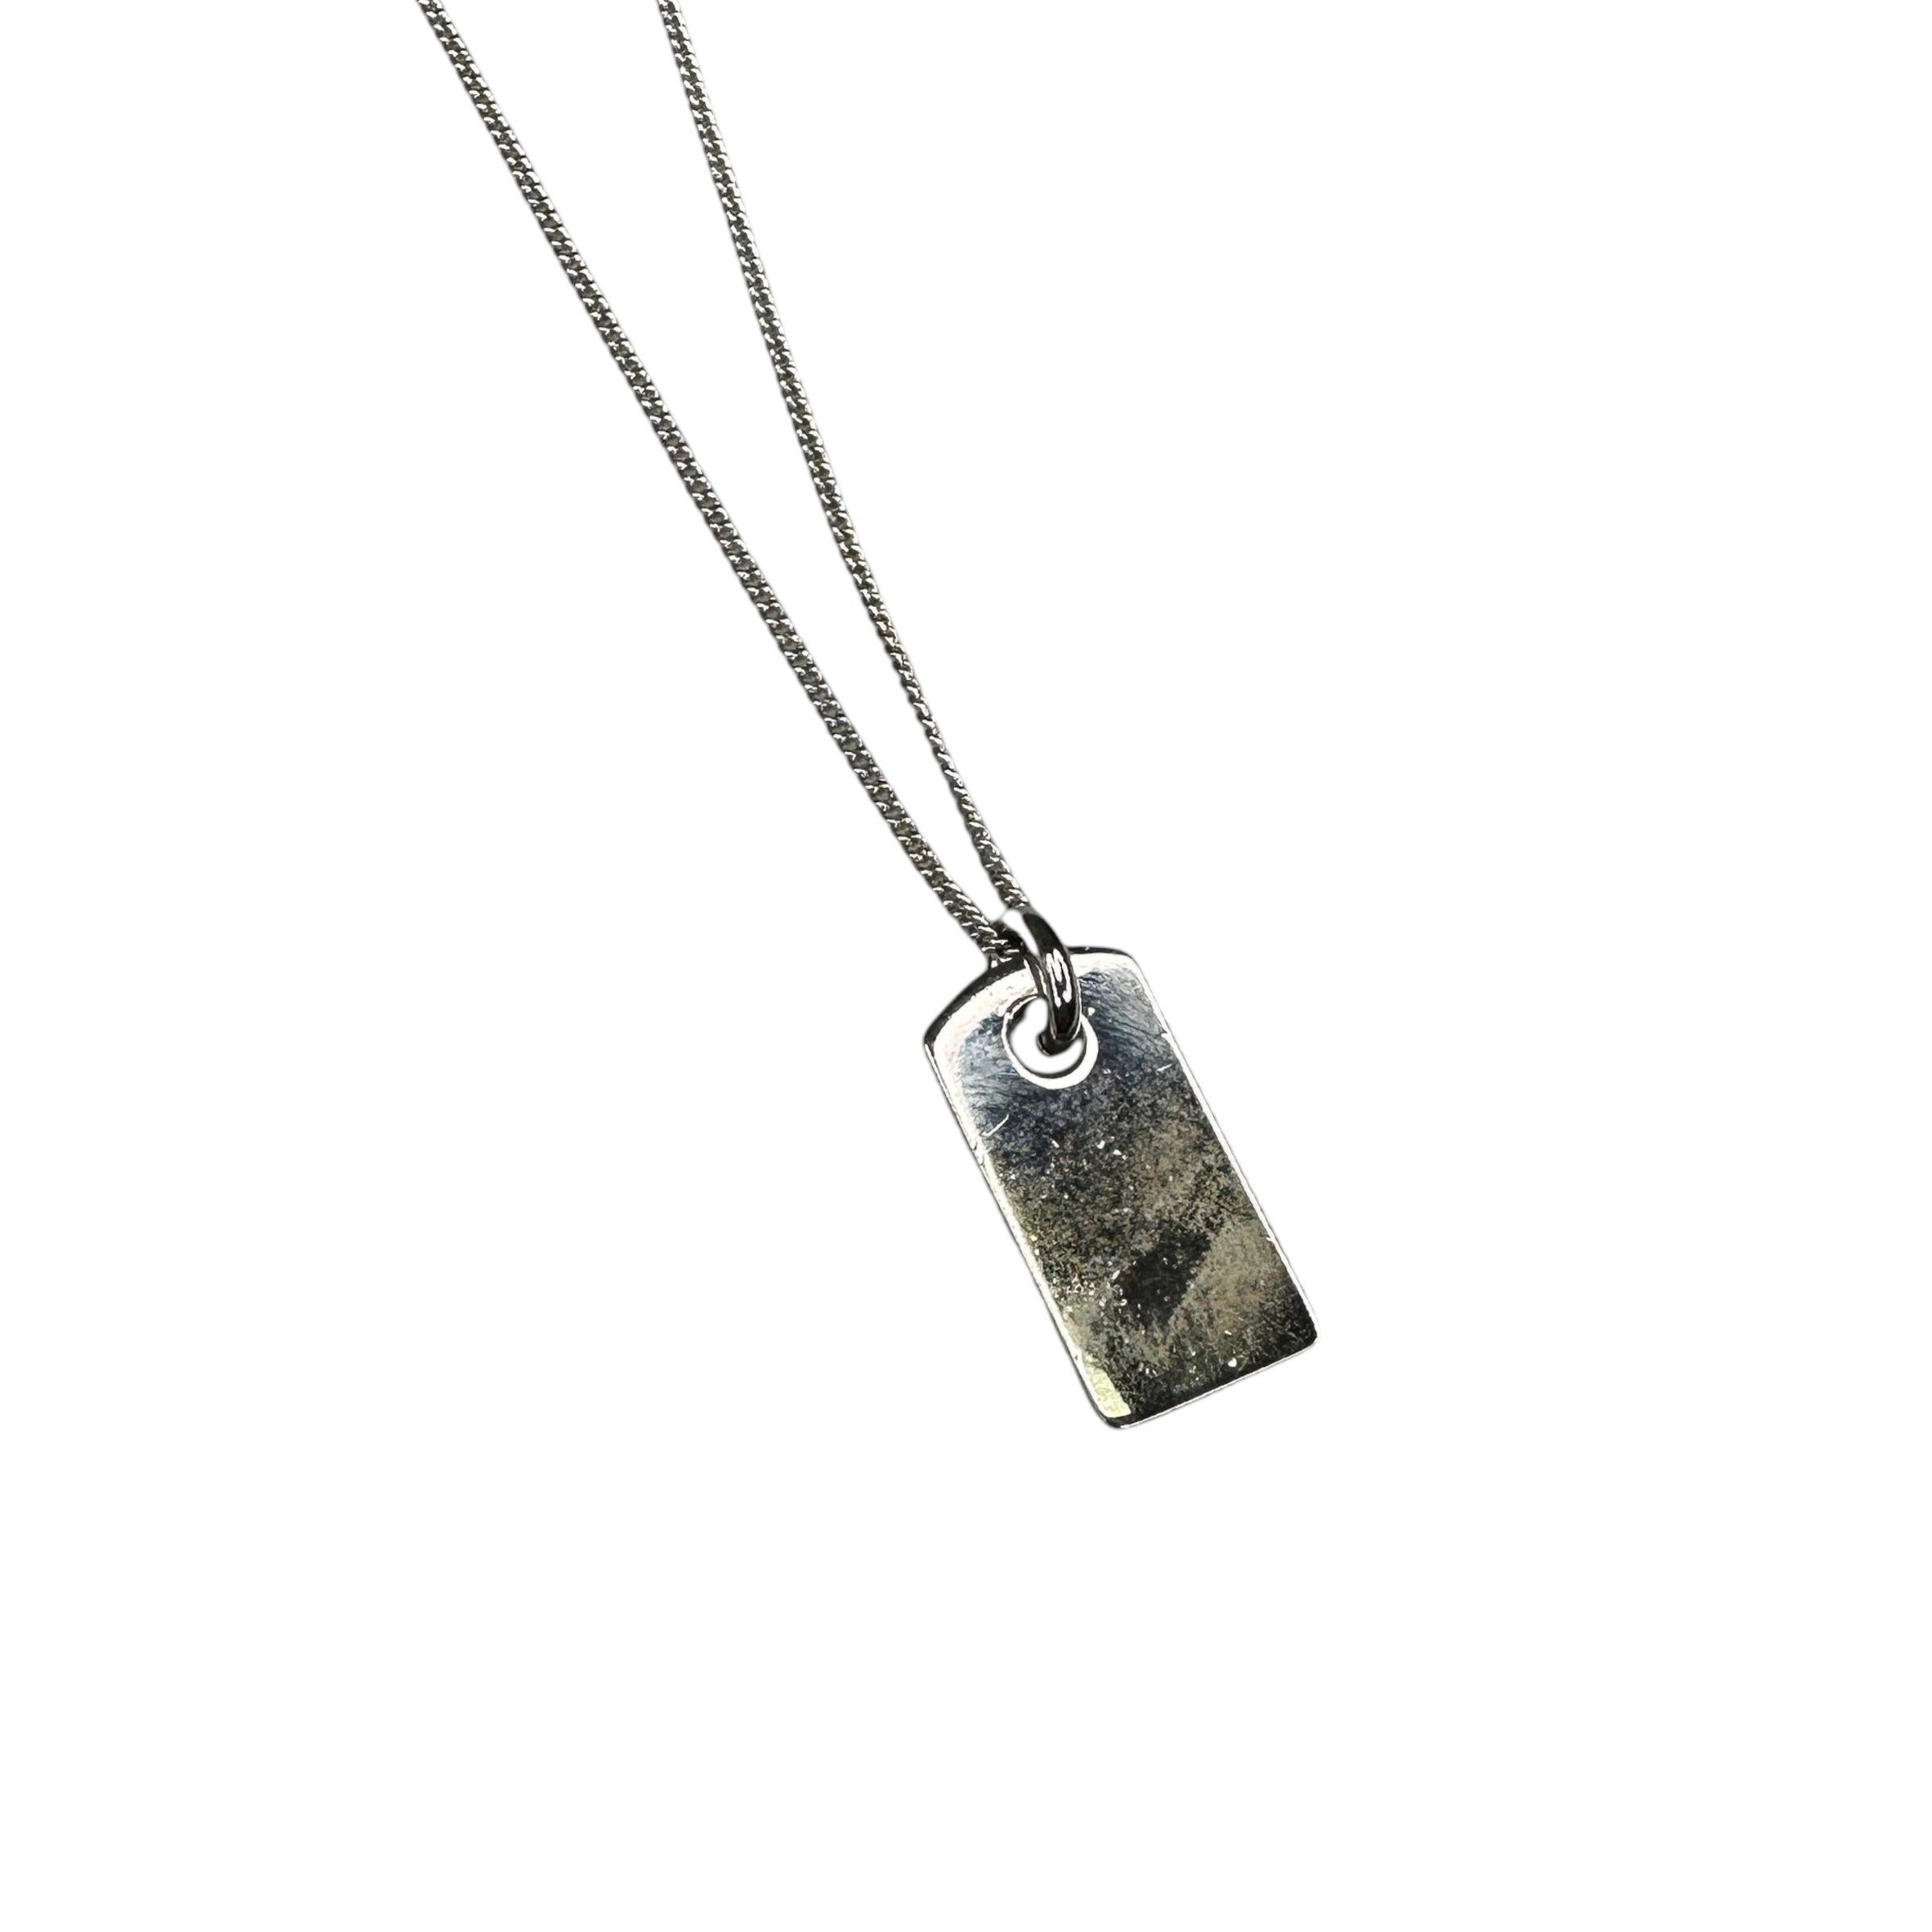 DIOR RHINESTONE SPELLOUT TAG NECKLACE - SILVER PLATED JE82